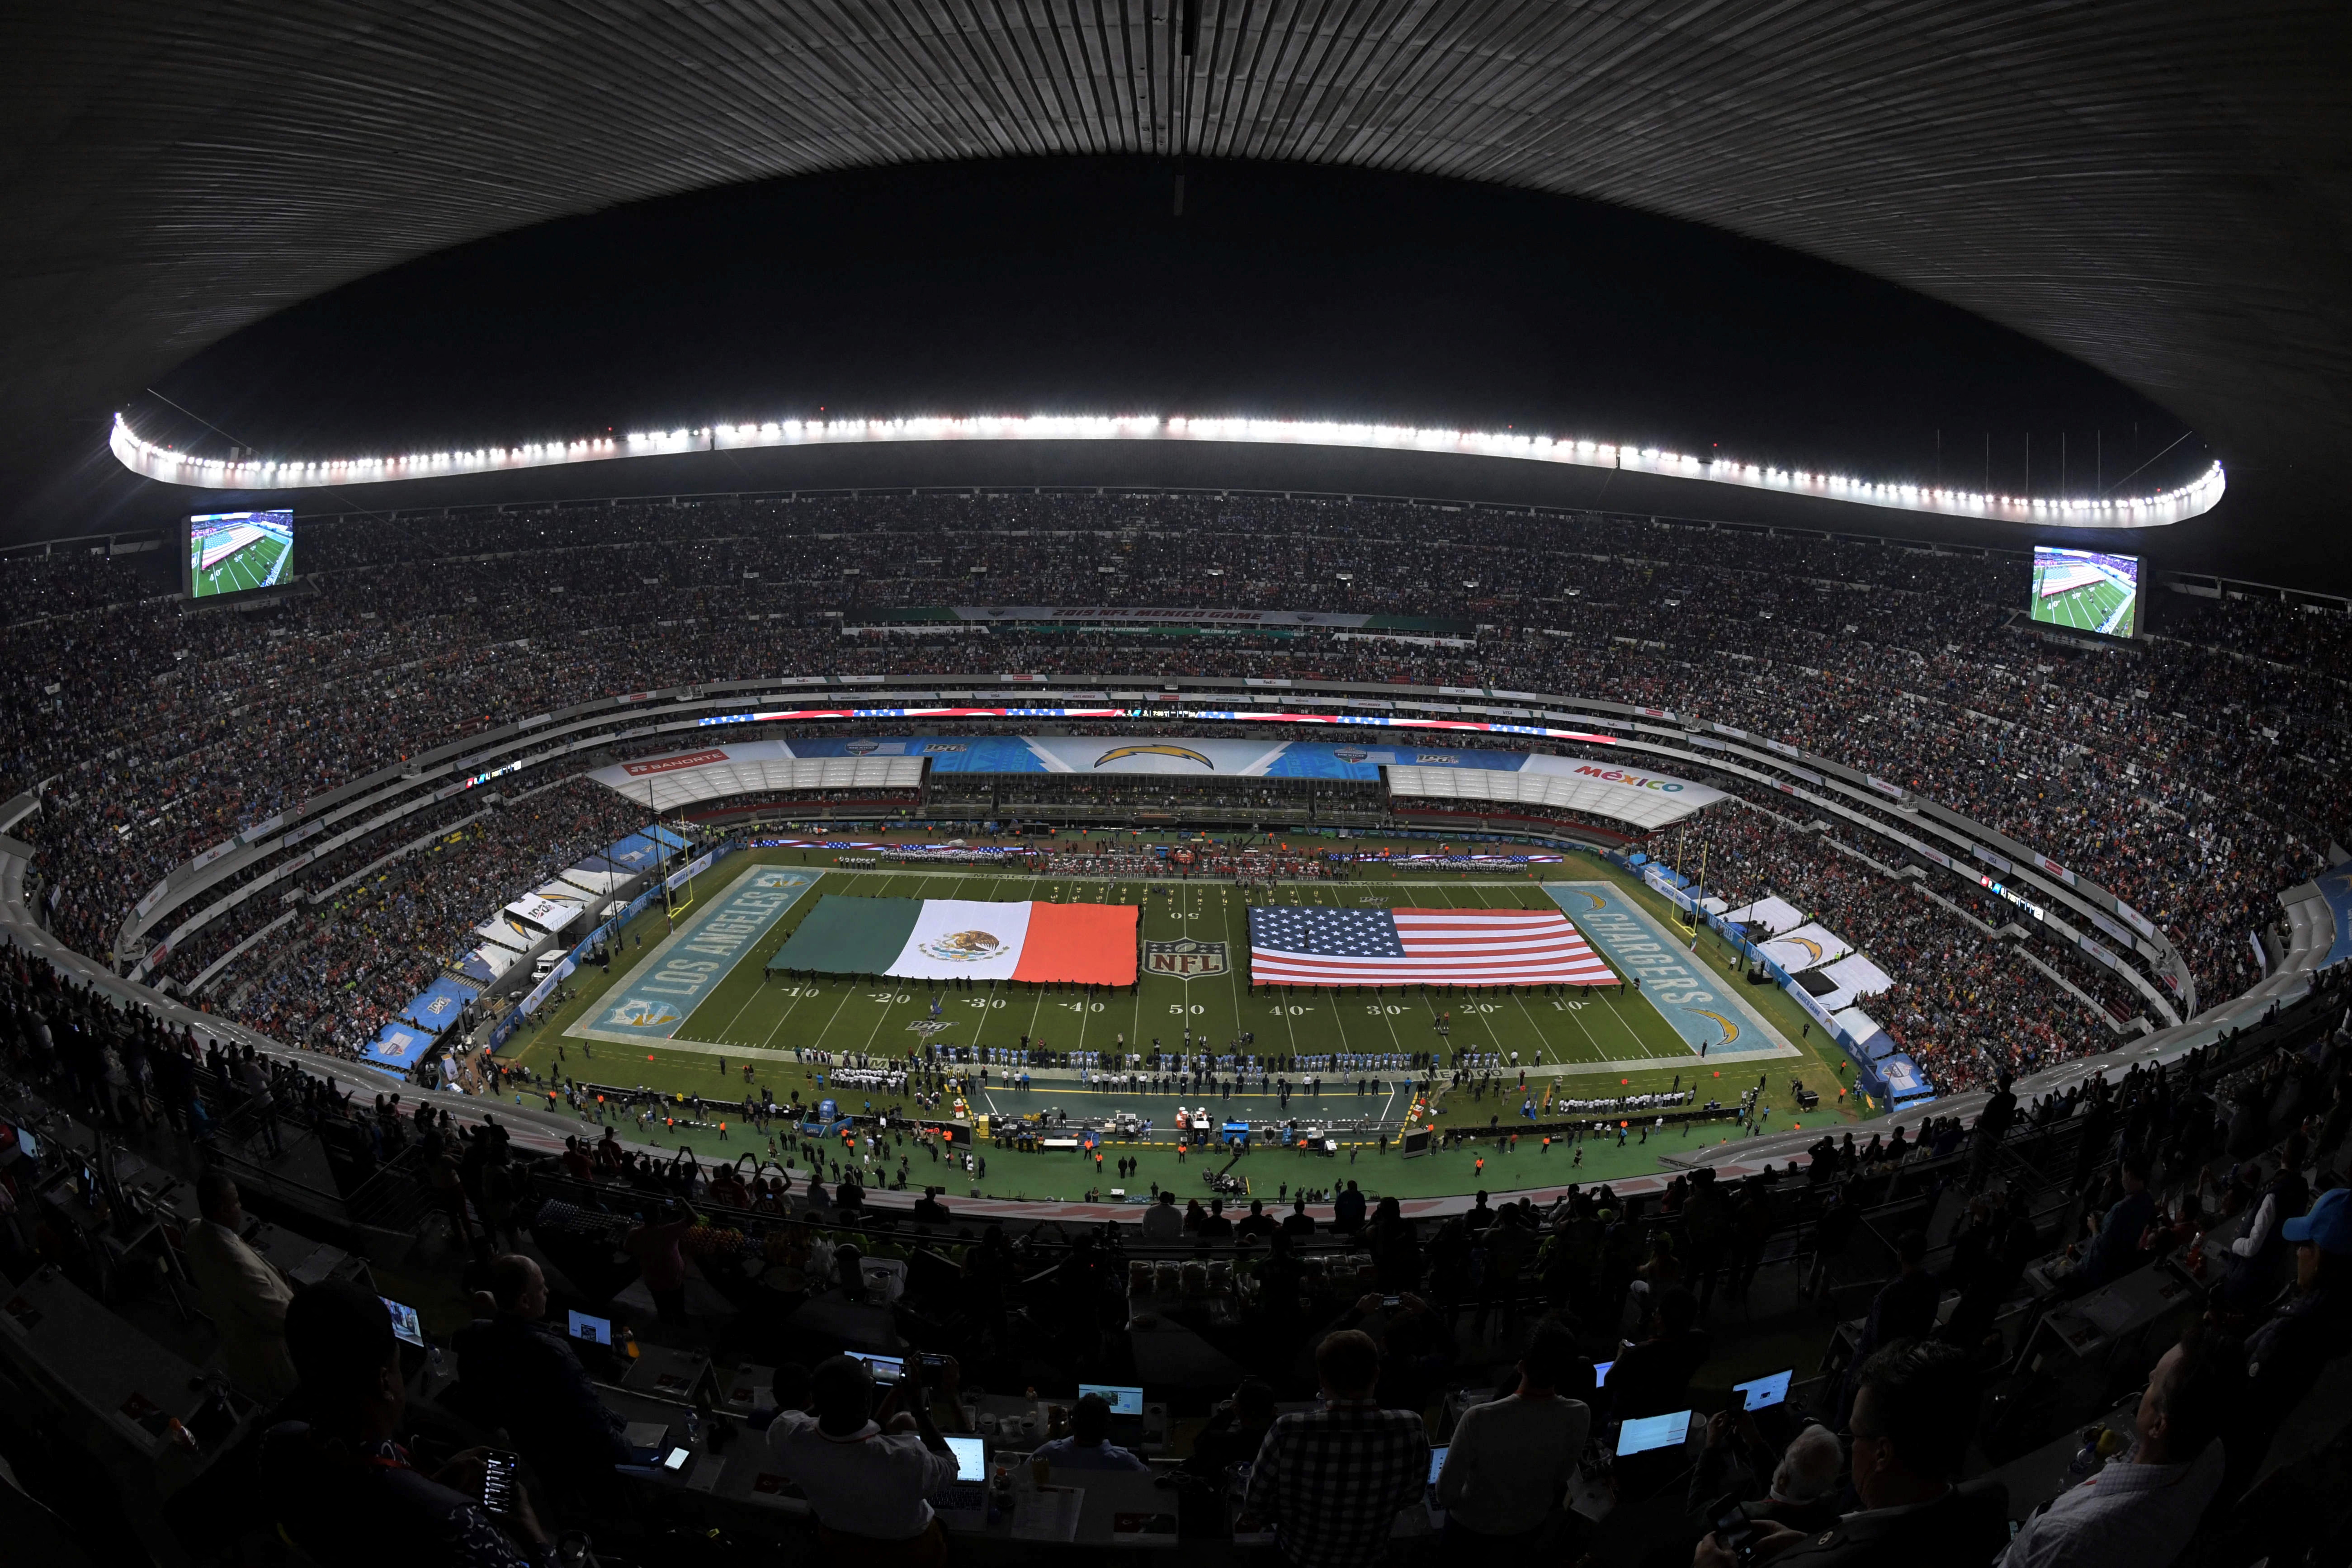 FILE PHOTO: General view of Estadio Azteca with United States and Mexican flags on the field during the playing of the national anthem before the NFL International Series game between the Kansas City Chiefs and the Los Angeles Chargers in Mexico City, Mexico November 18, 2019. Mandatory Credit: Kirby Lee-USA TODAY Sports via REUTERS/File Photo